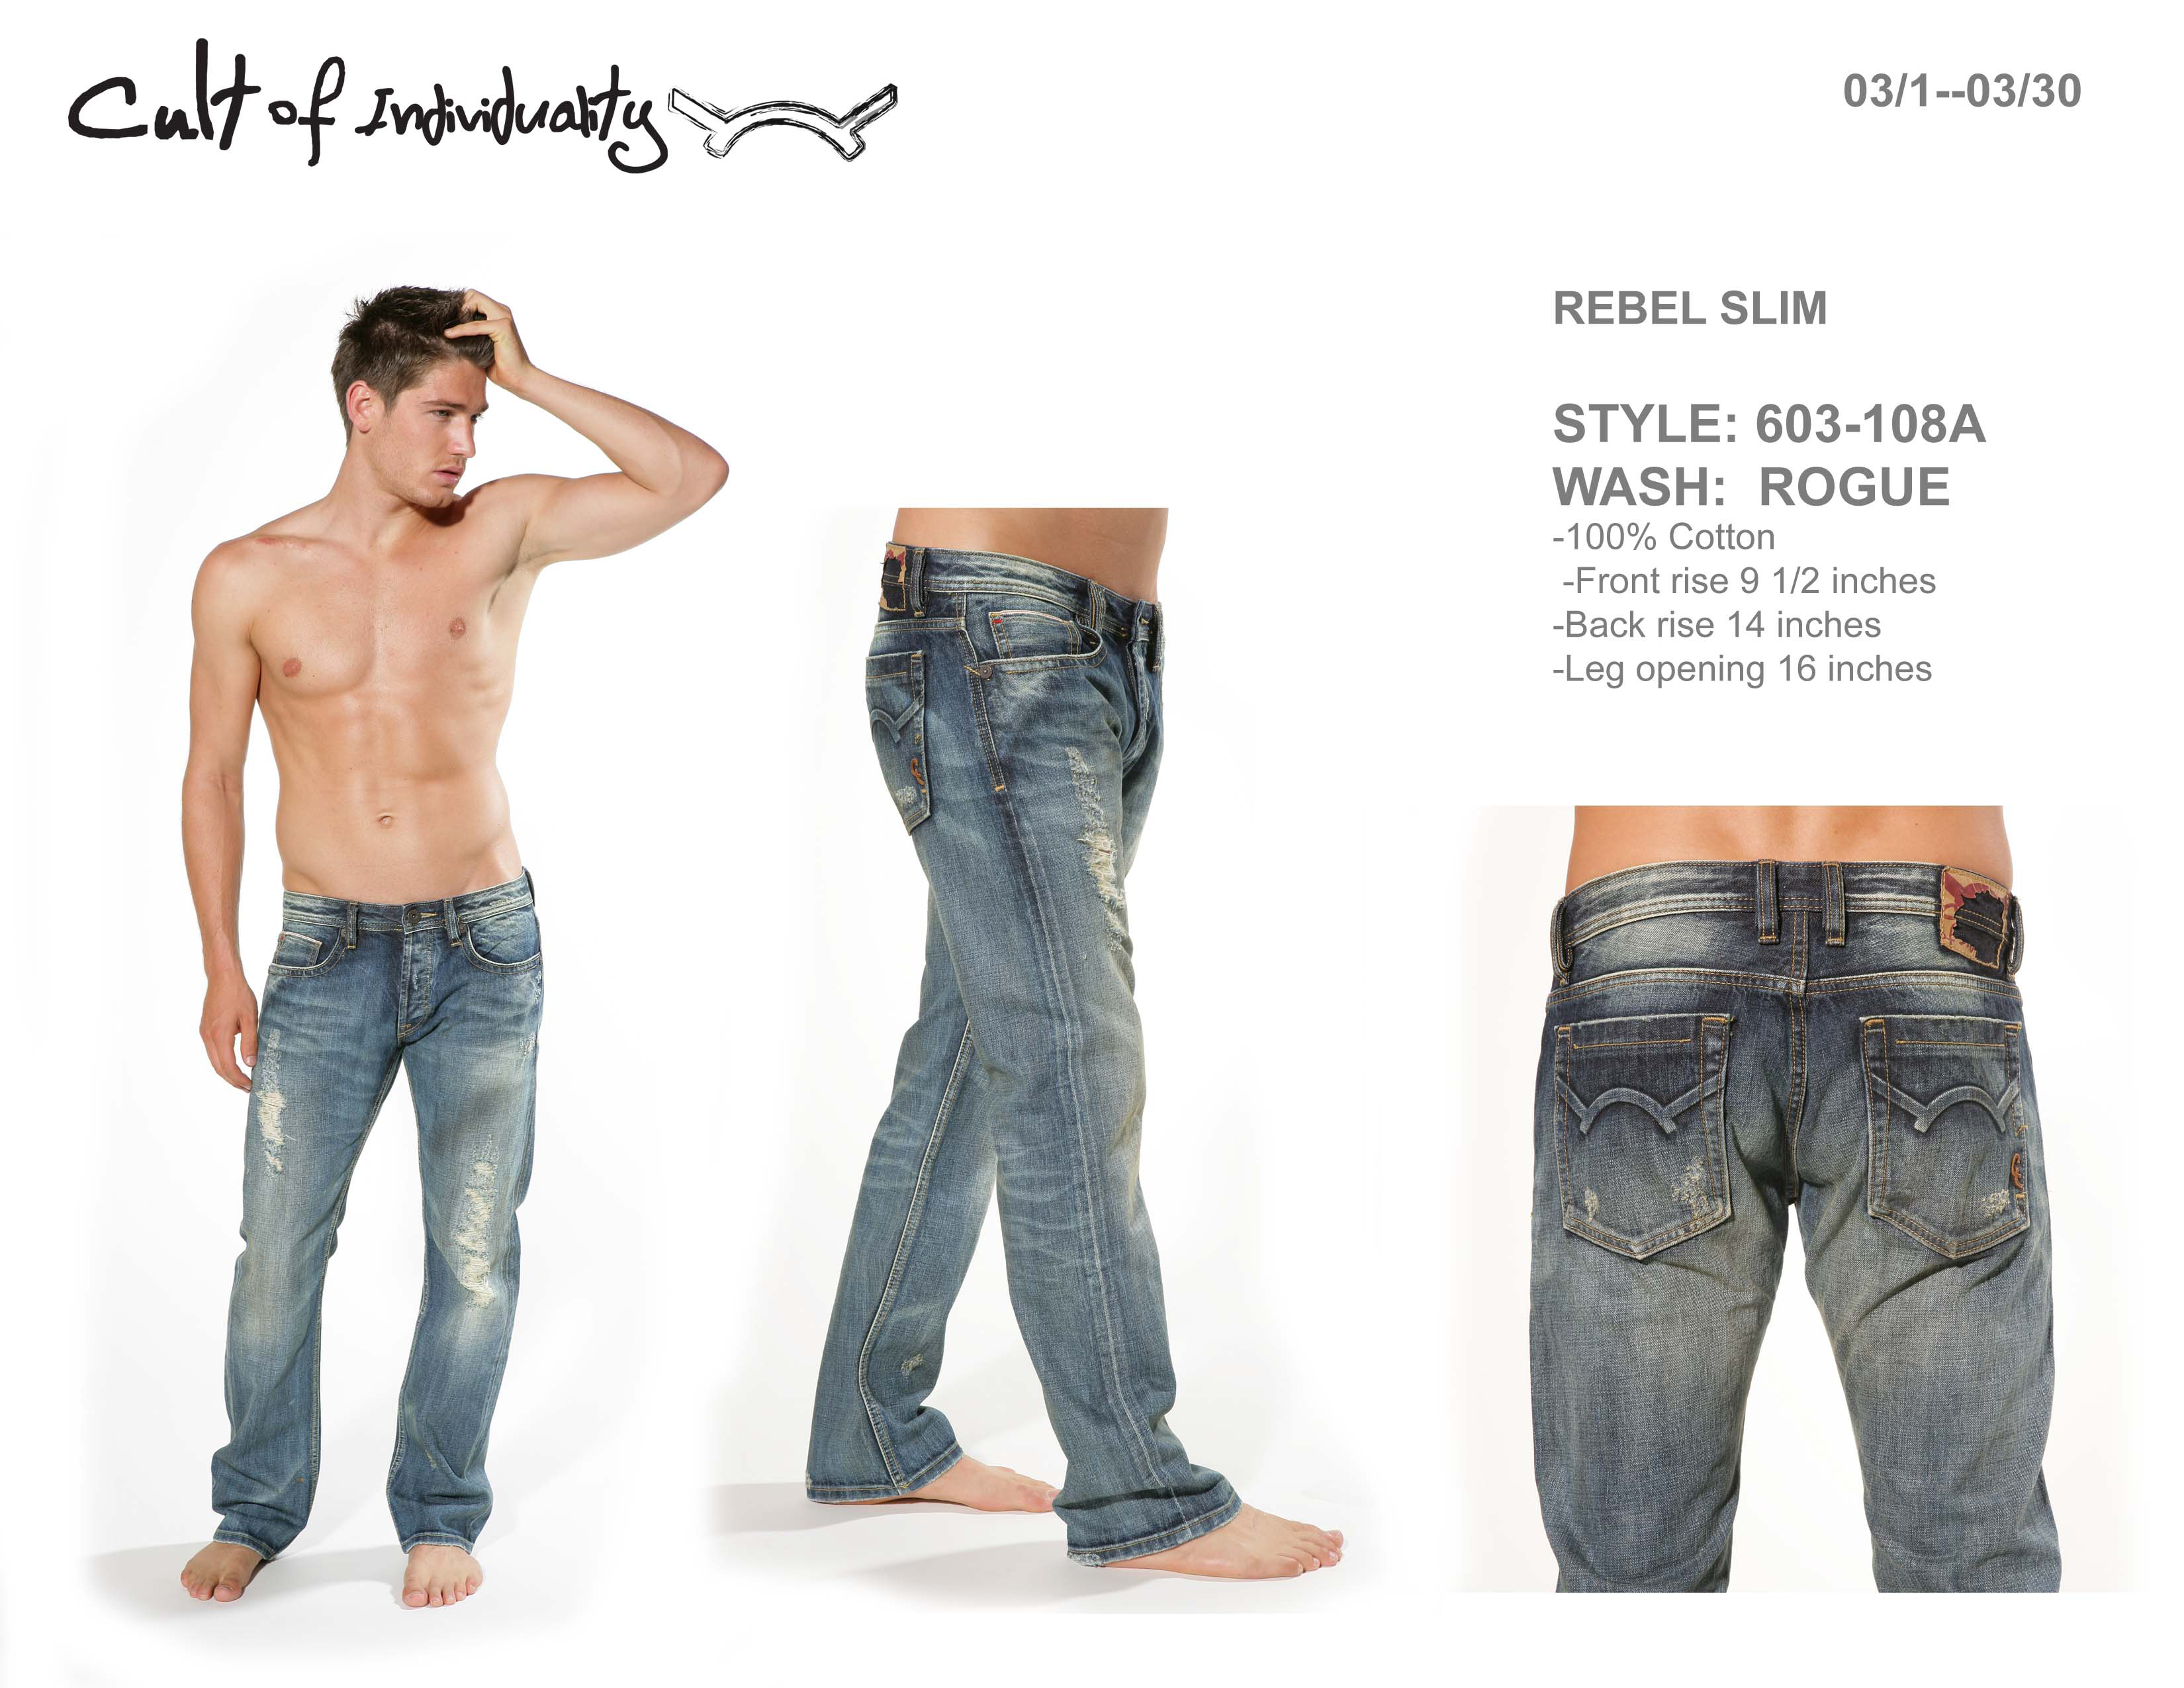 Cult of Individuality: A Pair of Jeans that Define You